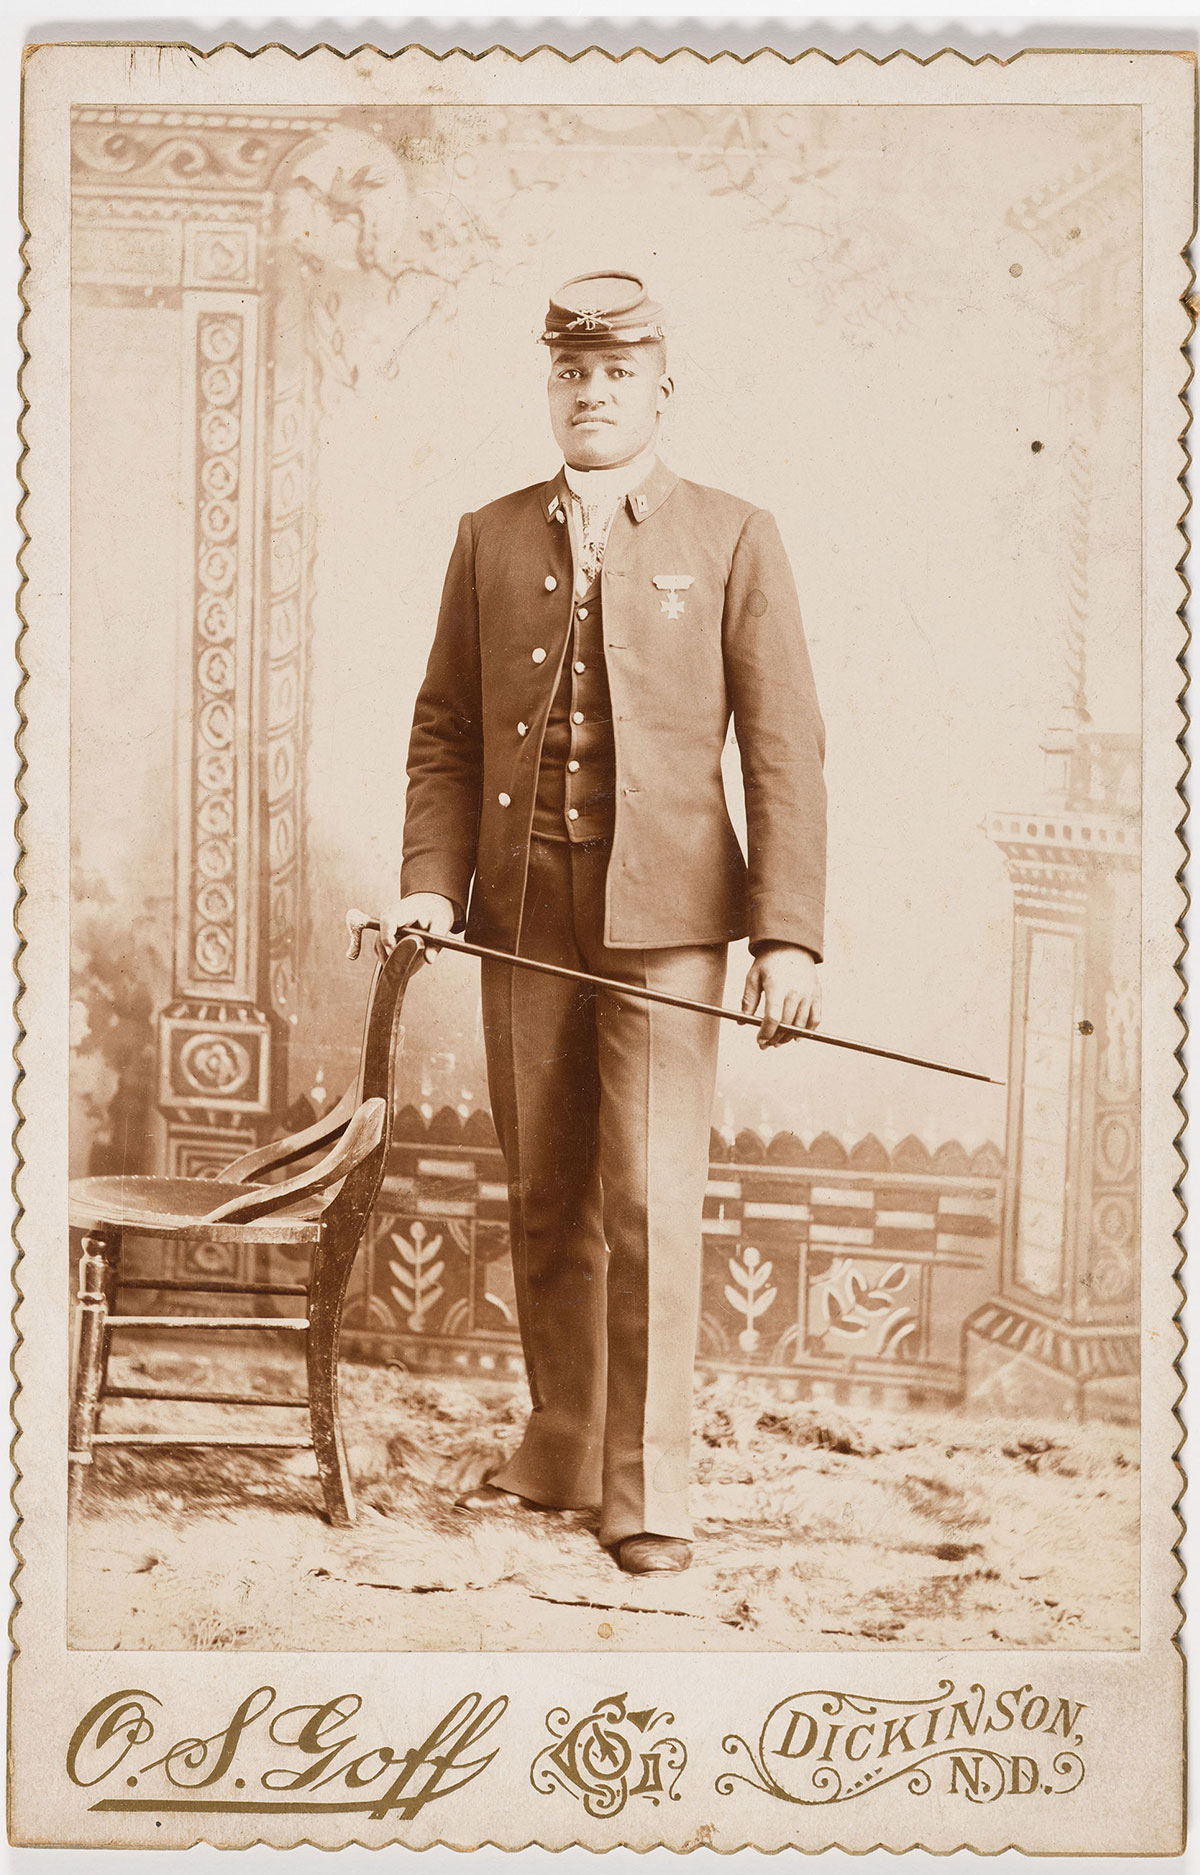 A man wearing an old-fashioned military uniform and hat stands in an ornate room next to a wooden chair, holding a walking cane across his body